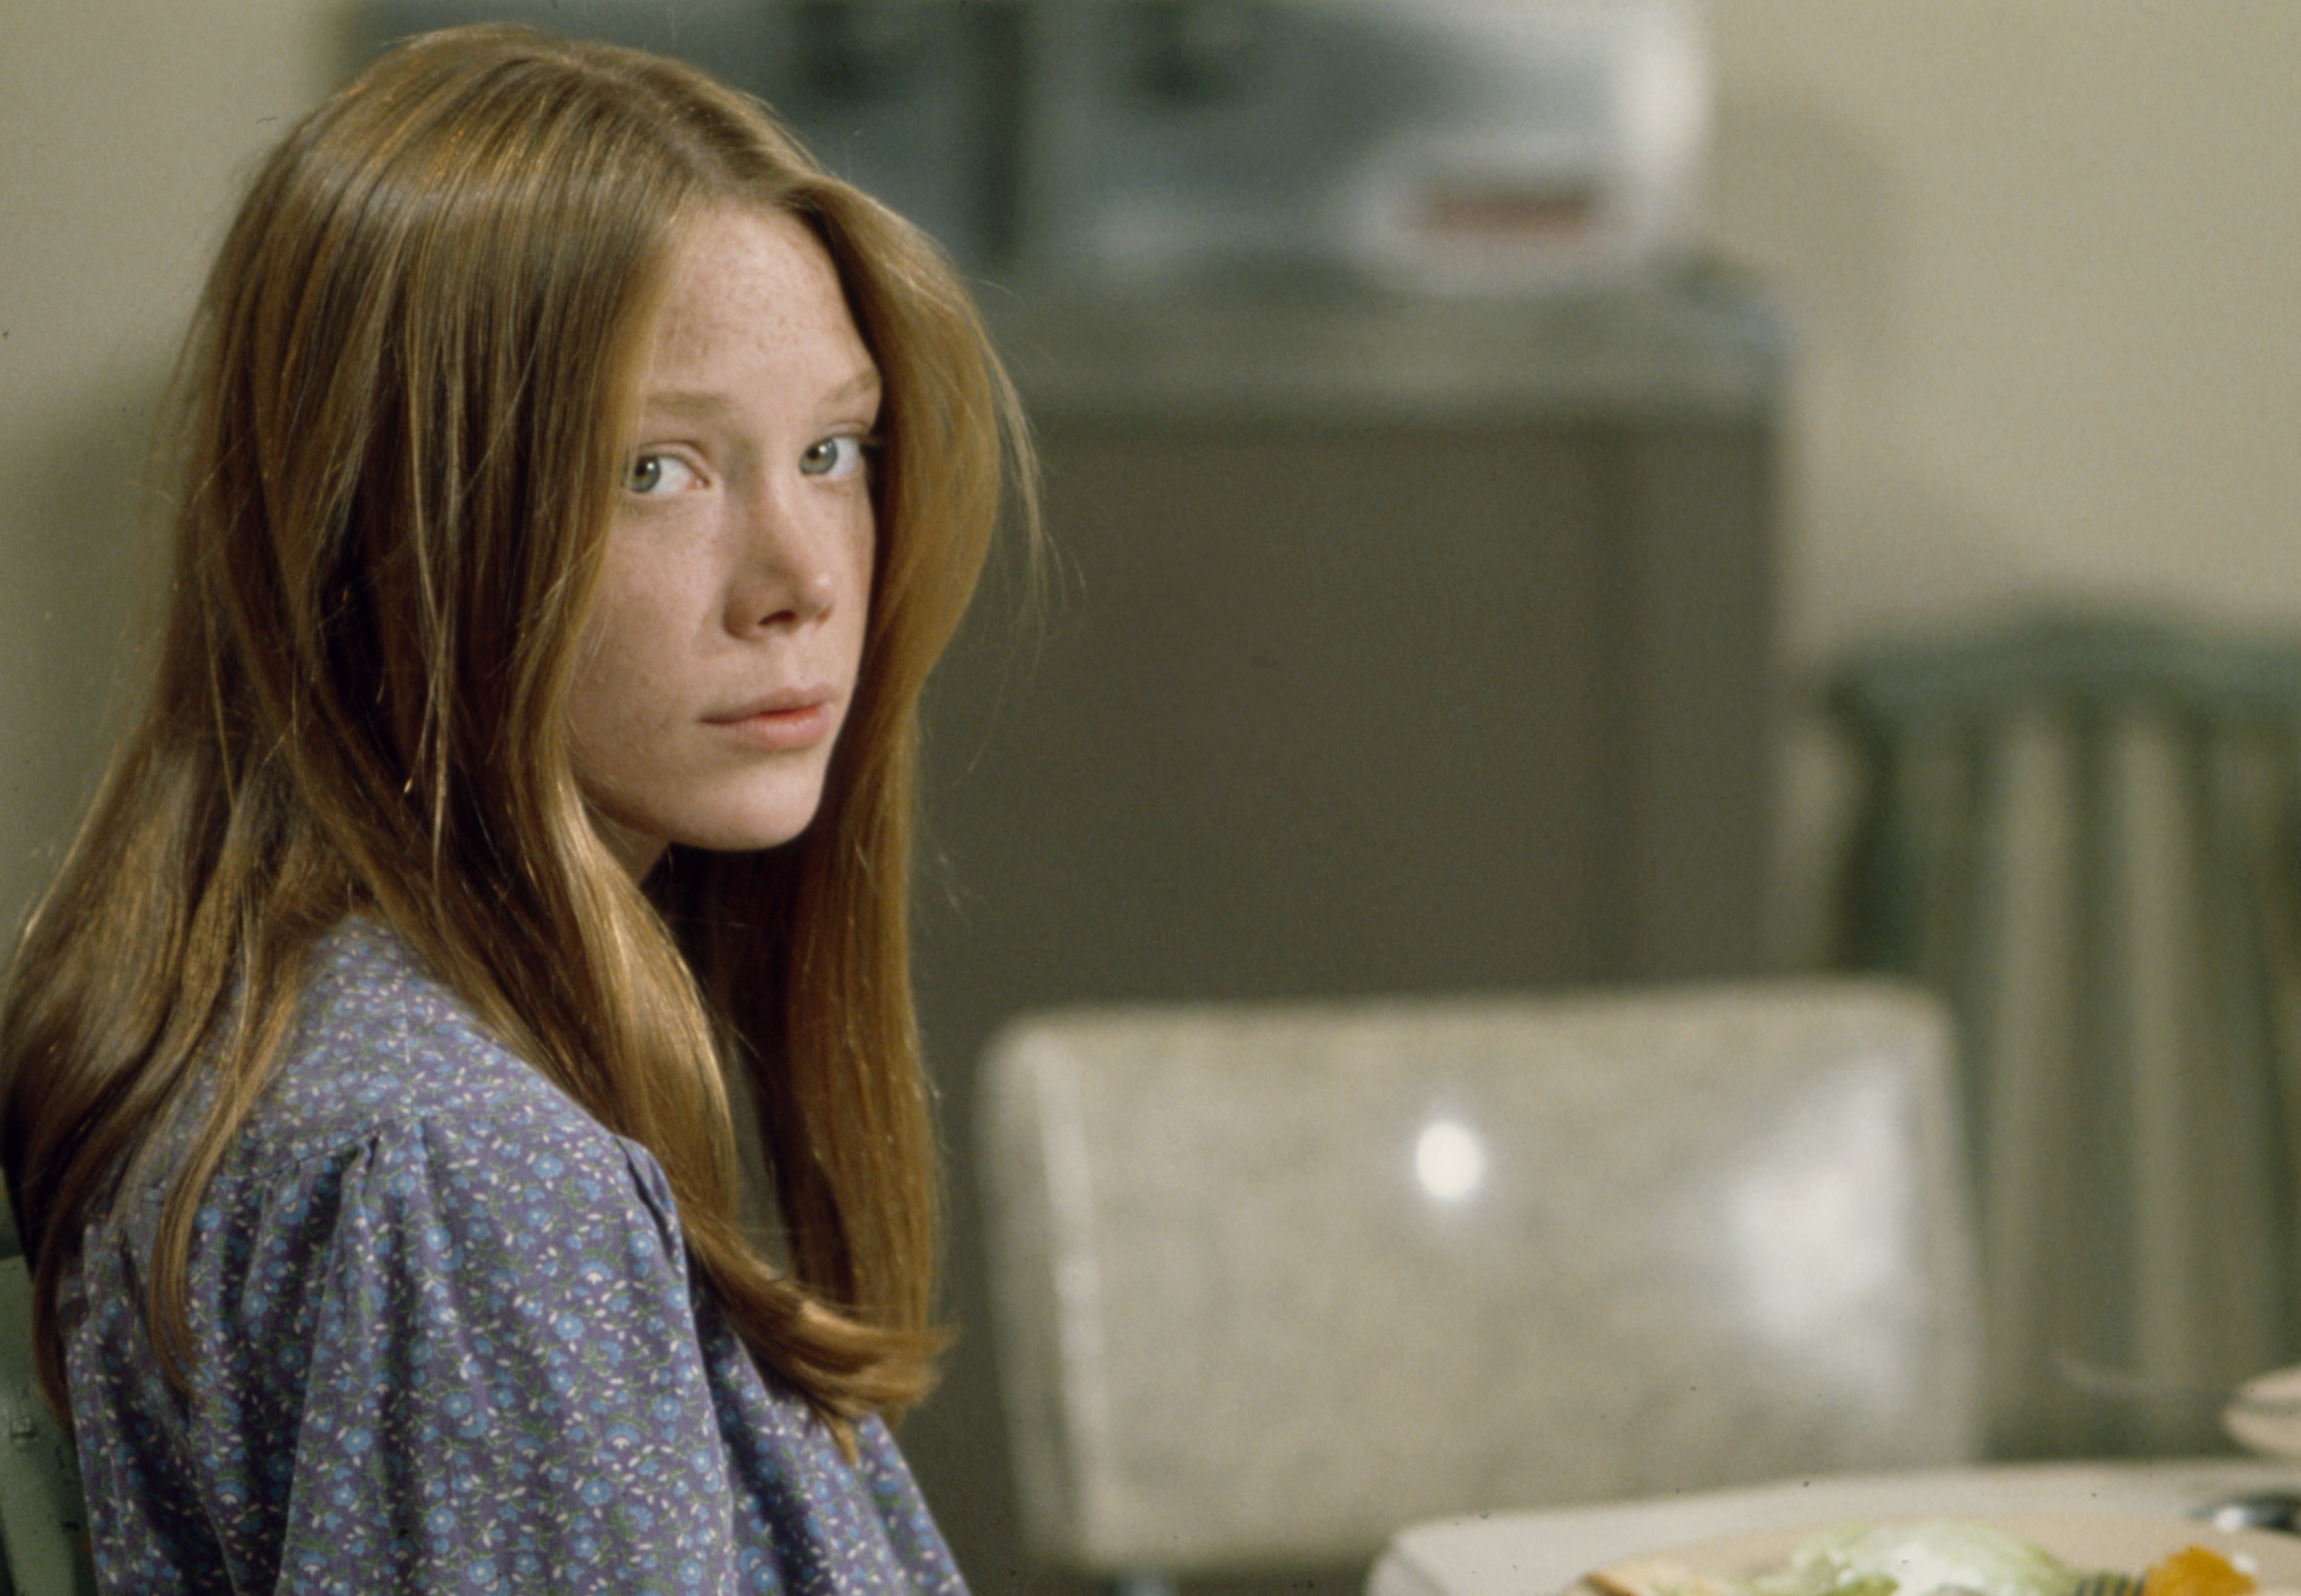 Sissy Spacek as Sara in the movie "The Girls of Huntington House," on February 14, 1973 | Source: Getty Images